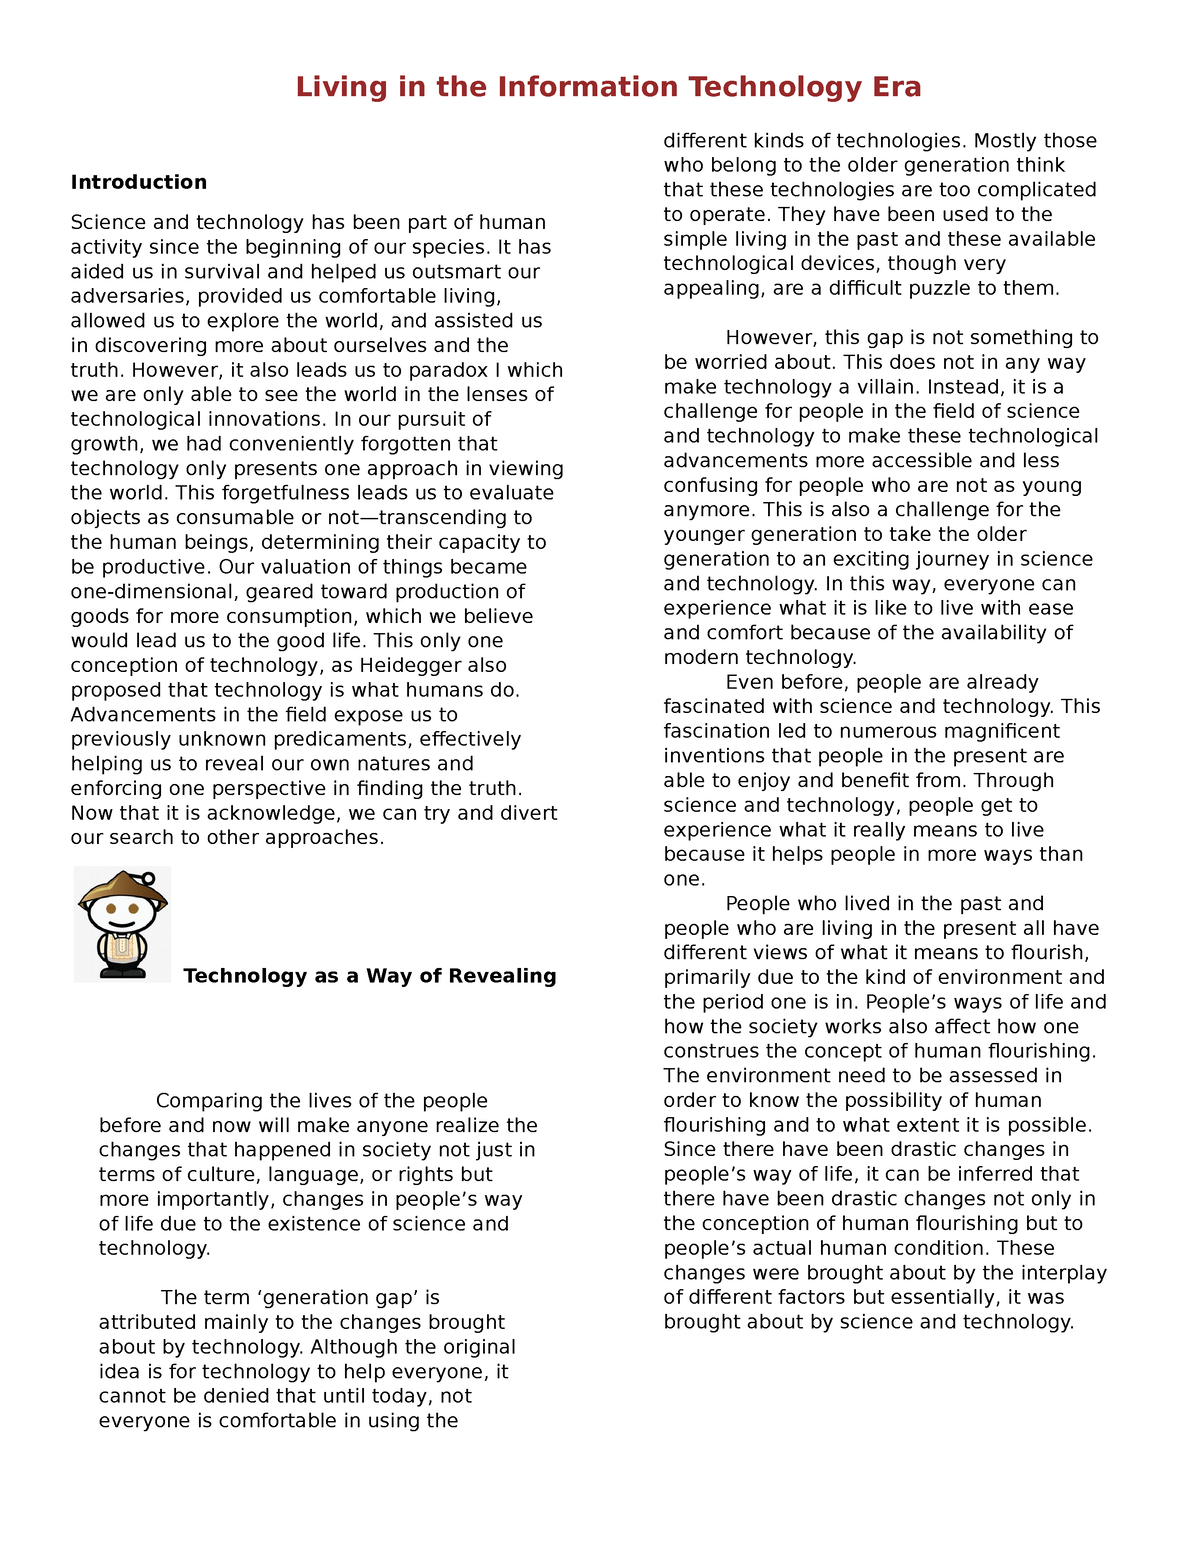 living in the information technology era essay